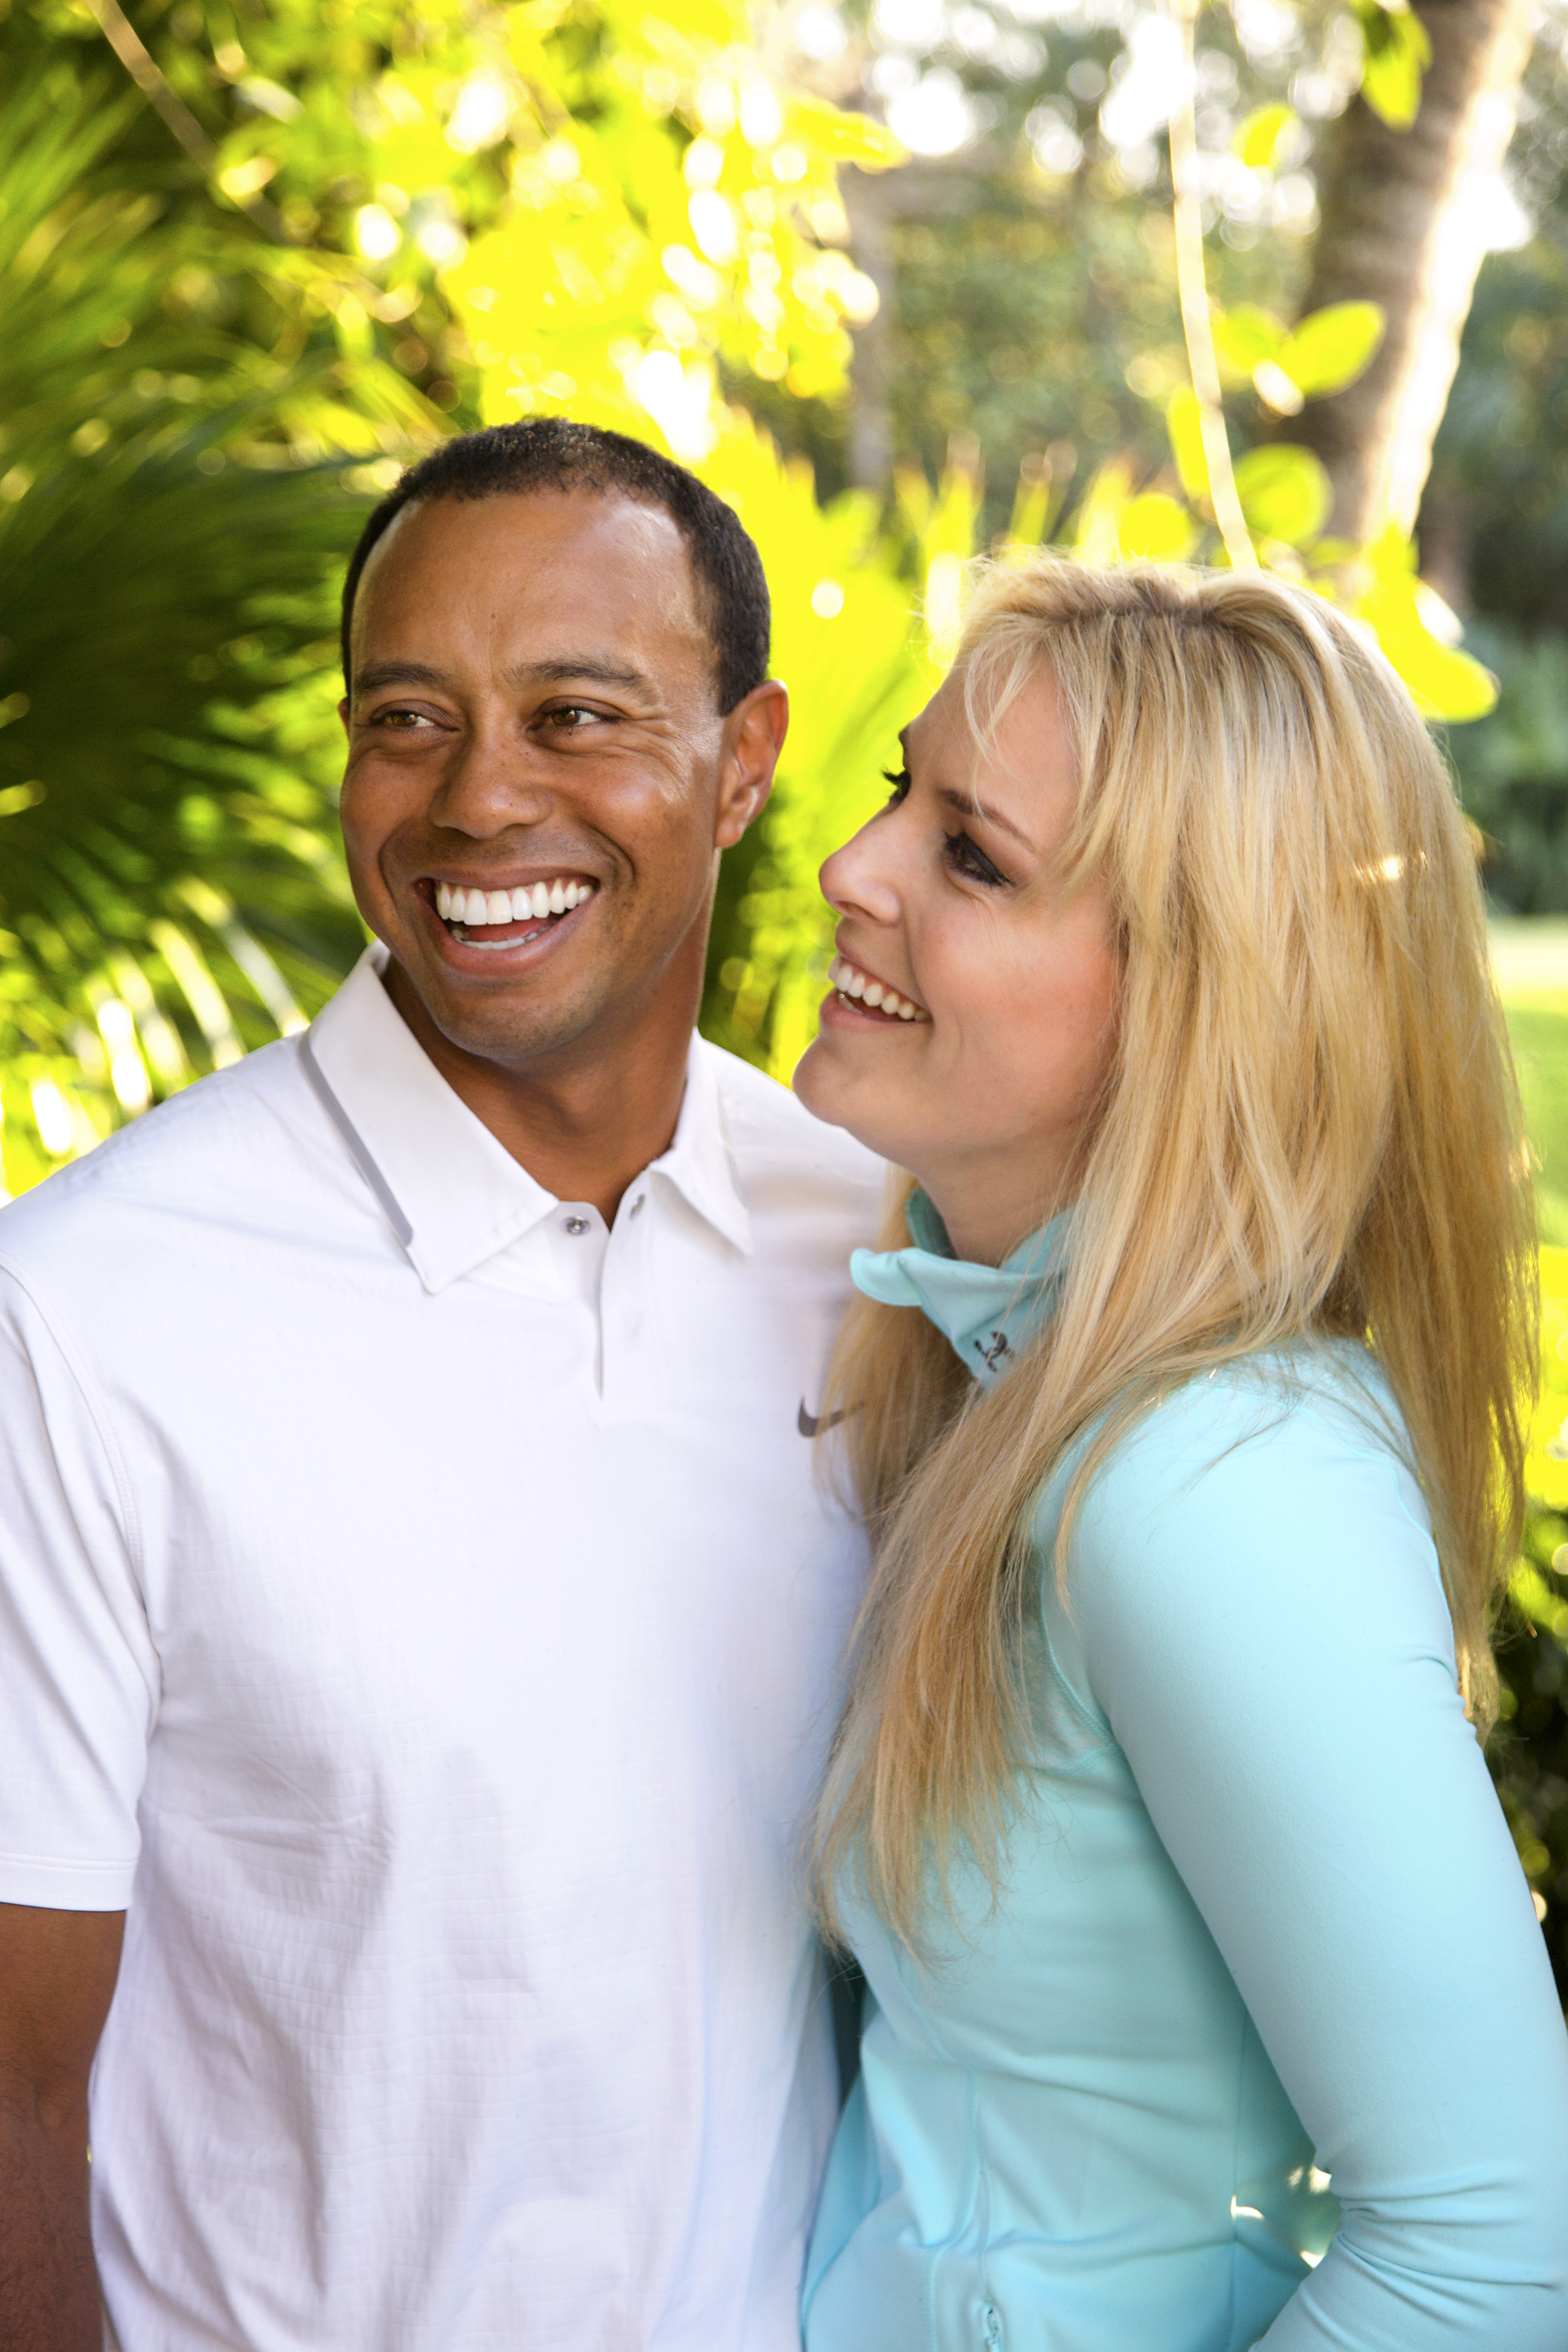 dan lapham recommends tiger woods dick size pic